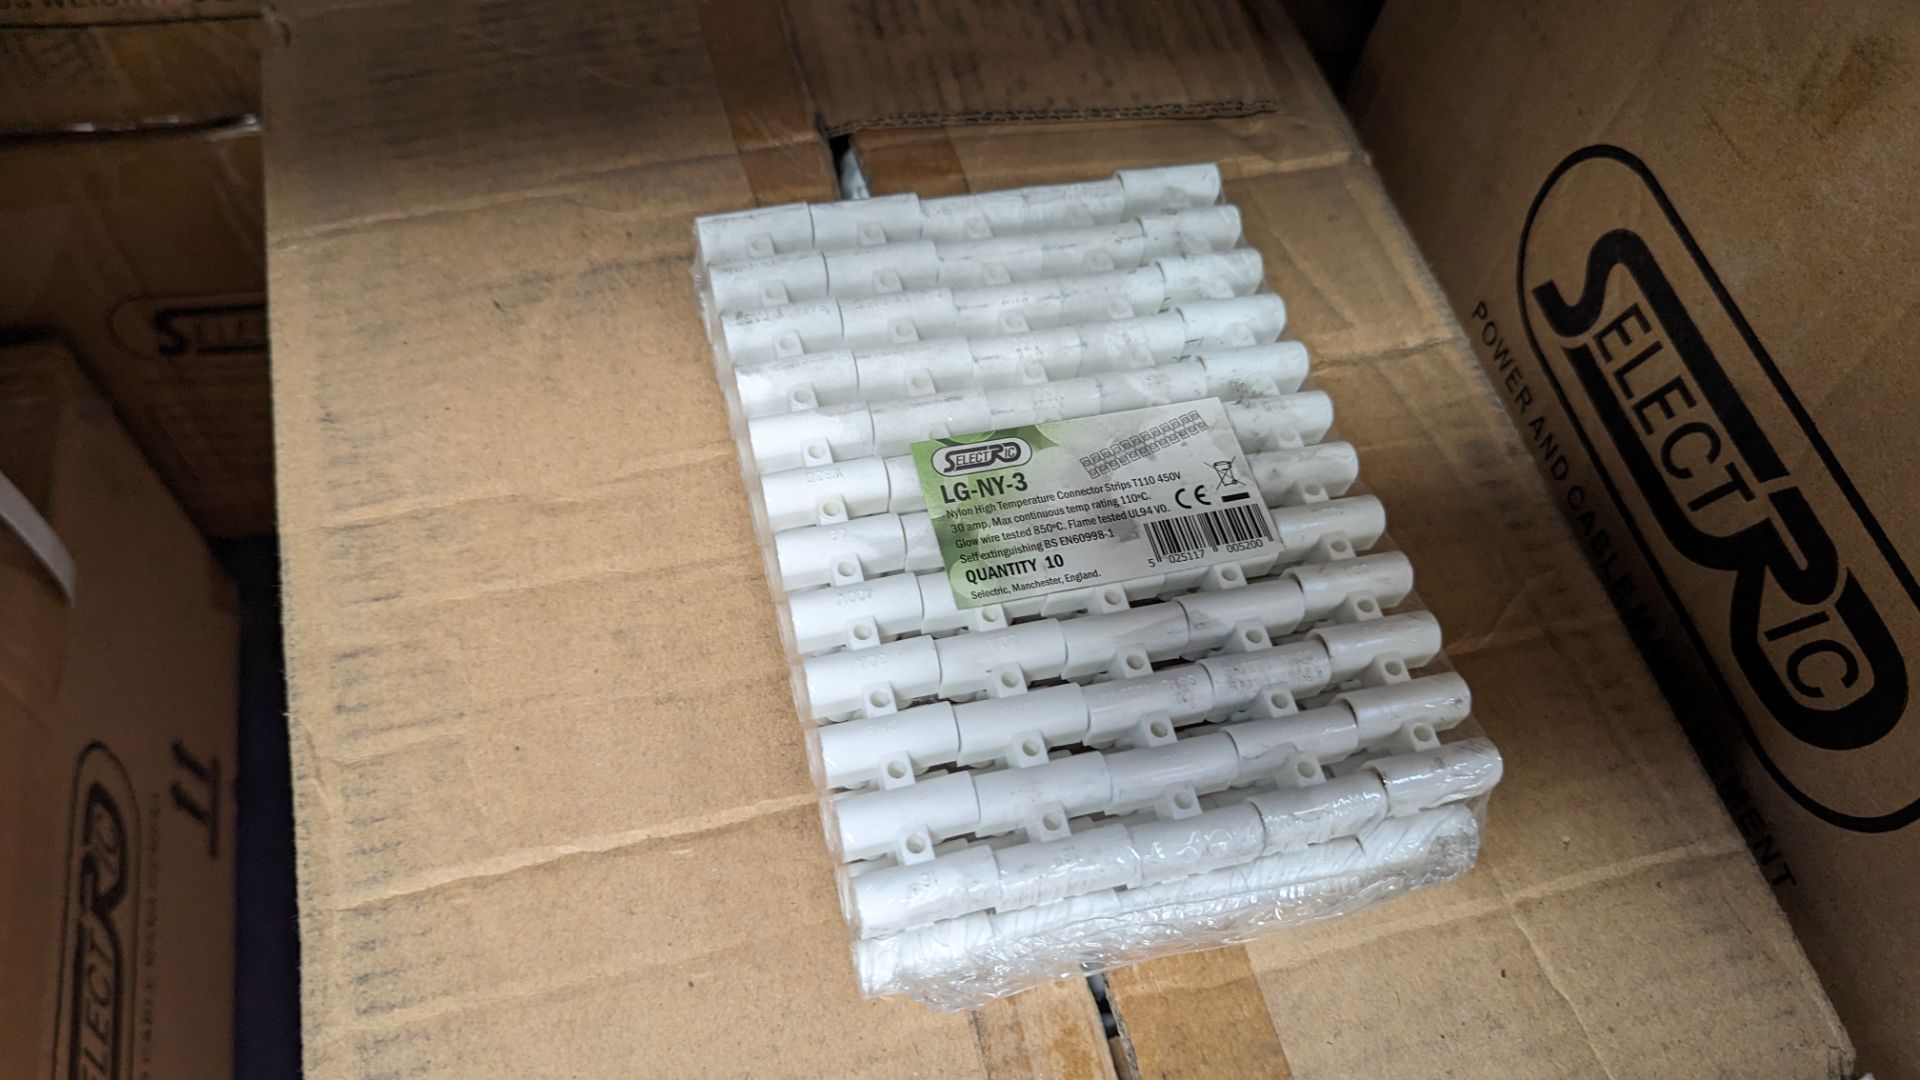 2 boxes (500 pieces total) of Selectric LG-NY-3 nylon high temperature connector strips, 30 amp - Image 3 of 4